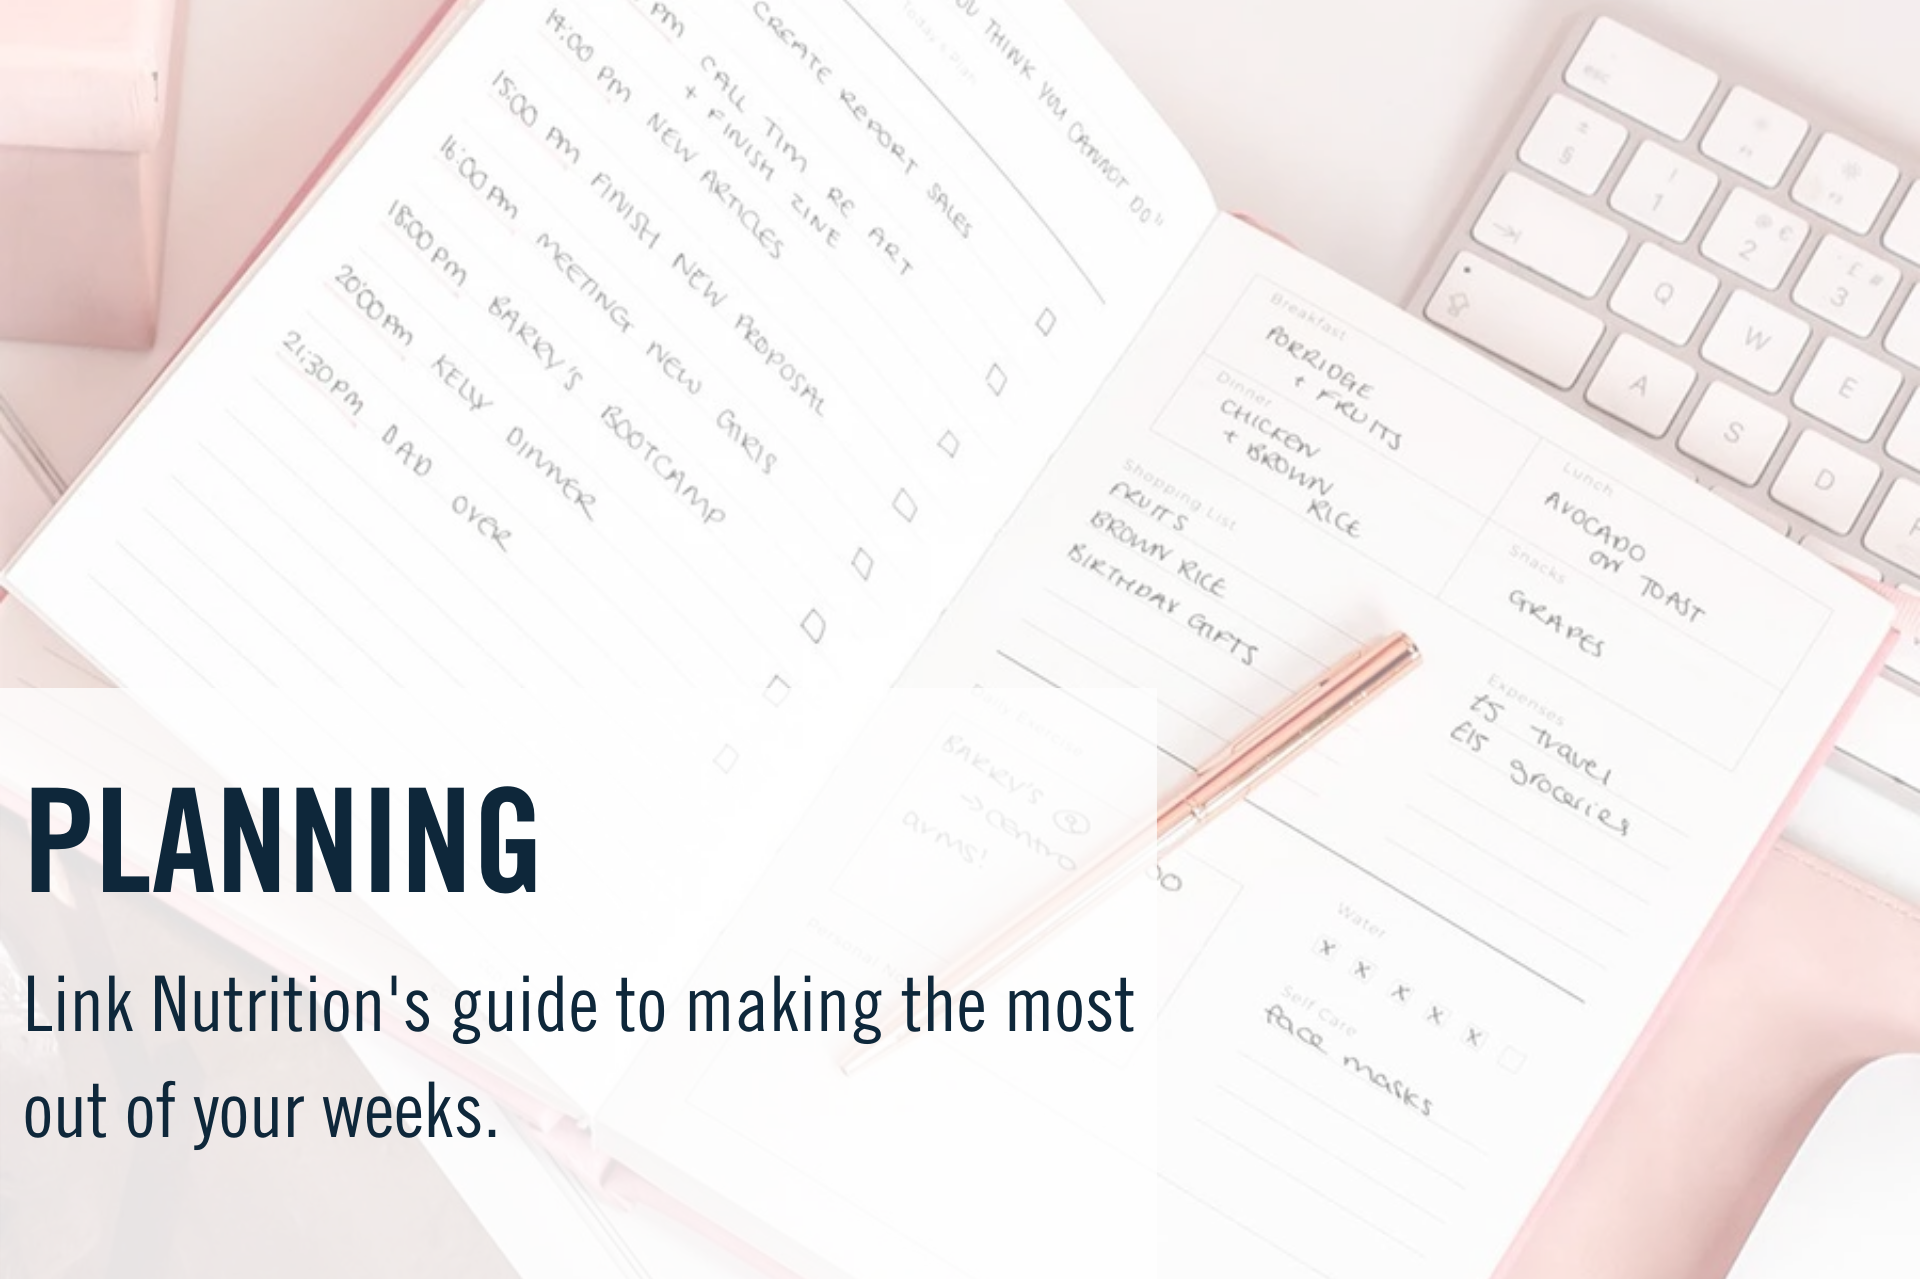 Link Nutrition's guide to getting the most out of your weeks